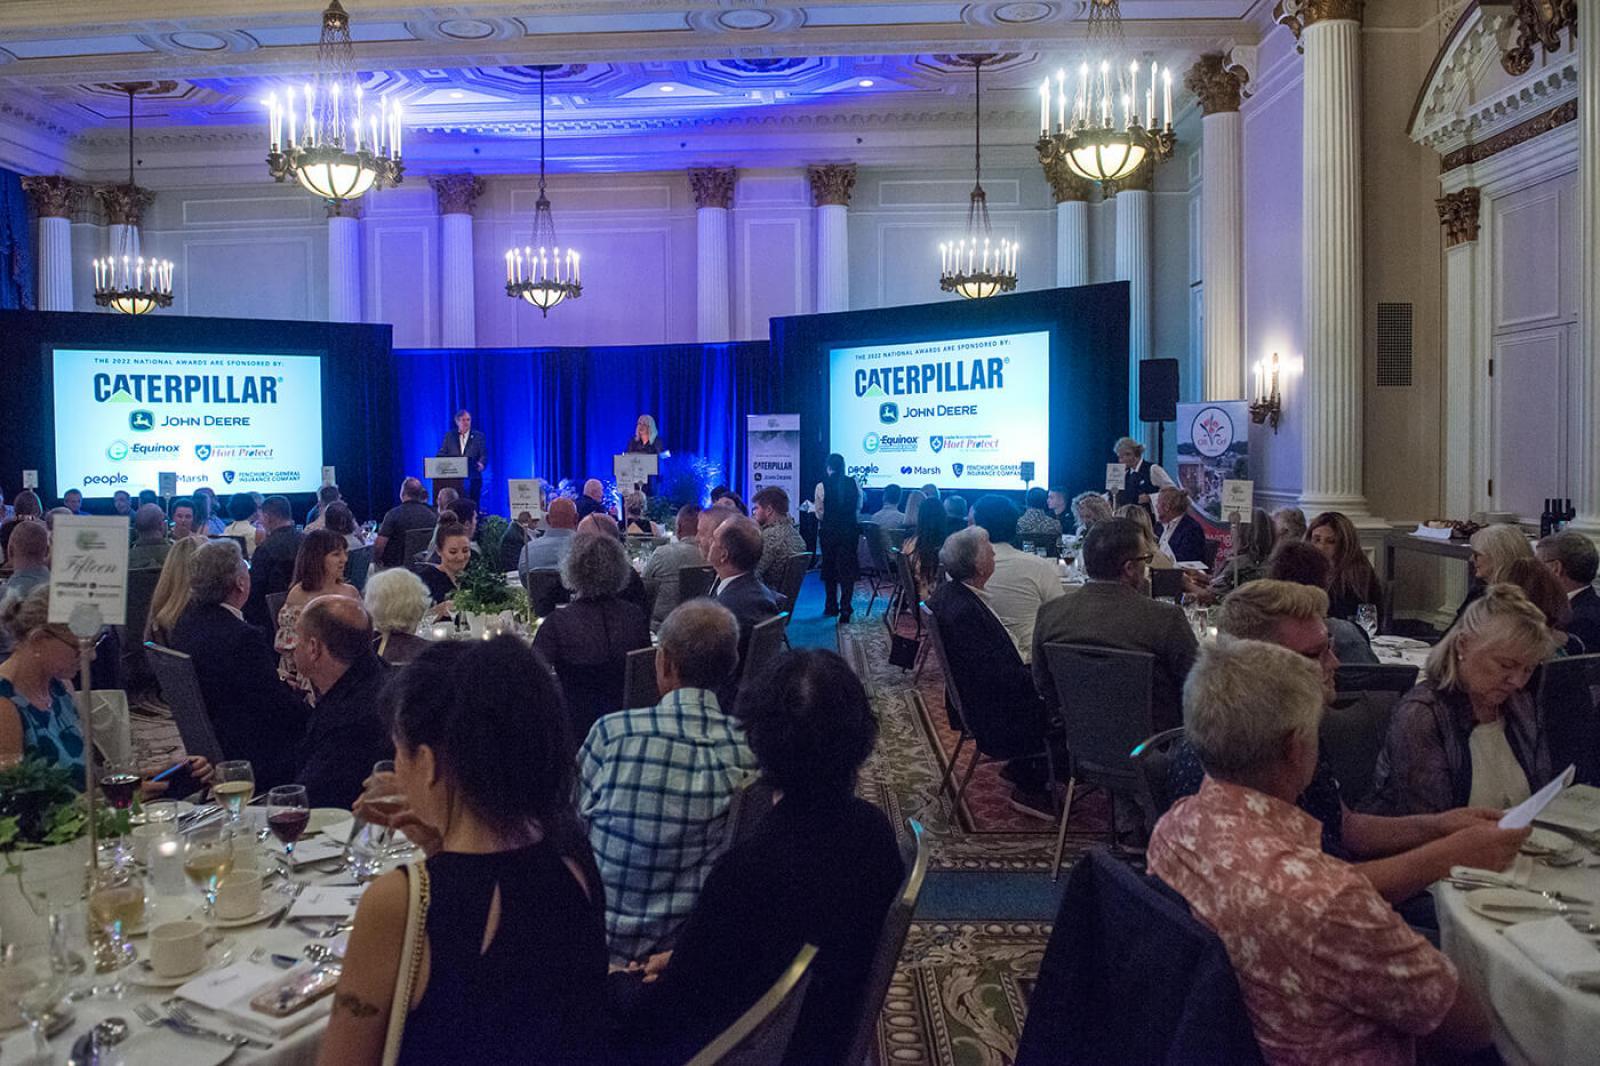 The ballroom at the Fairmont Chateau Laurier was packed with more than 140 members of the industry from across the country, representing a cross section of the horticultural trades.